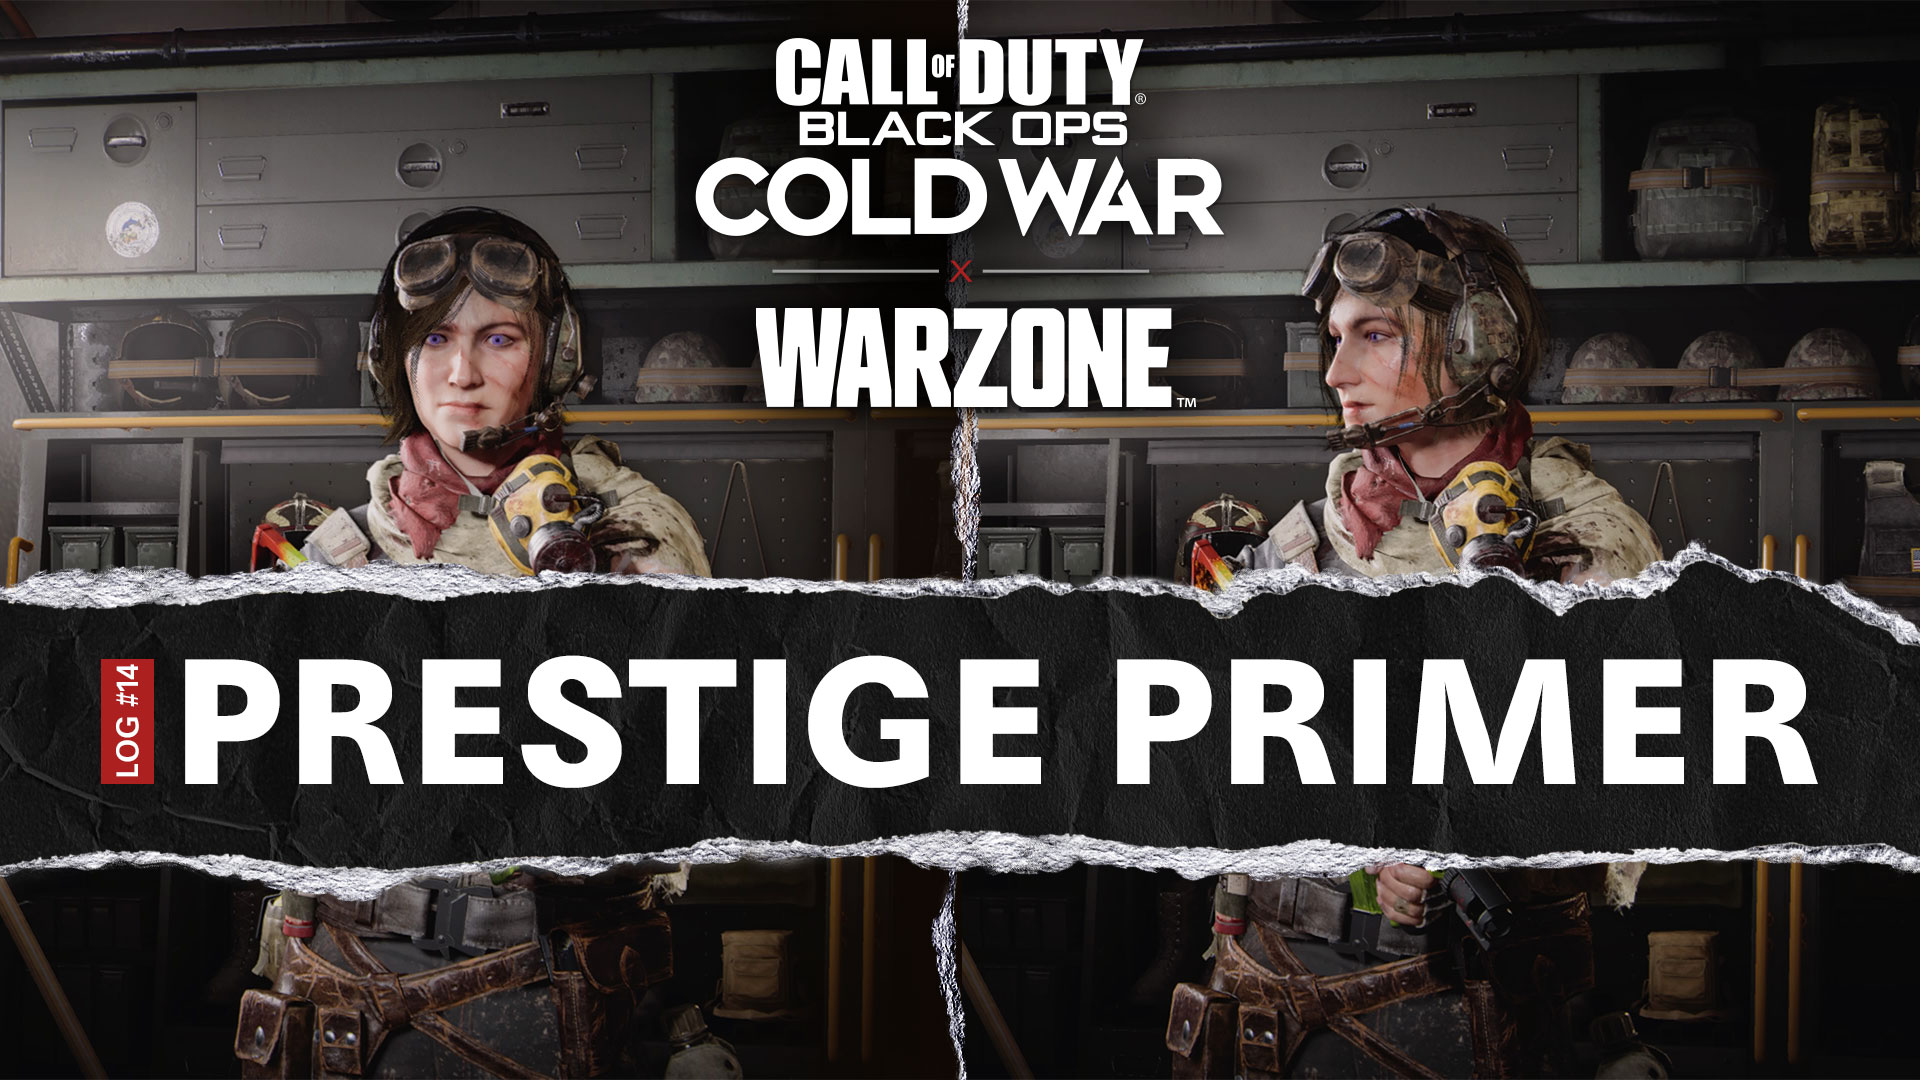 The Prestige Primer Episode 14: Zombie-slaying tactics for Warzone